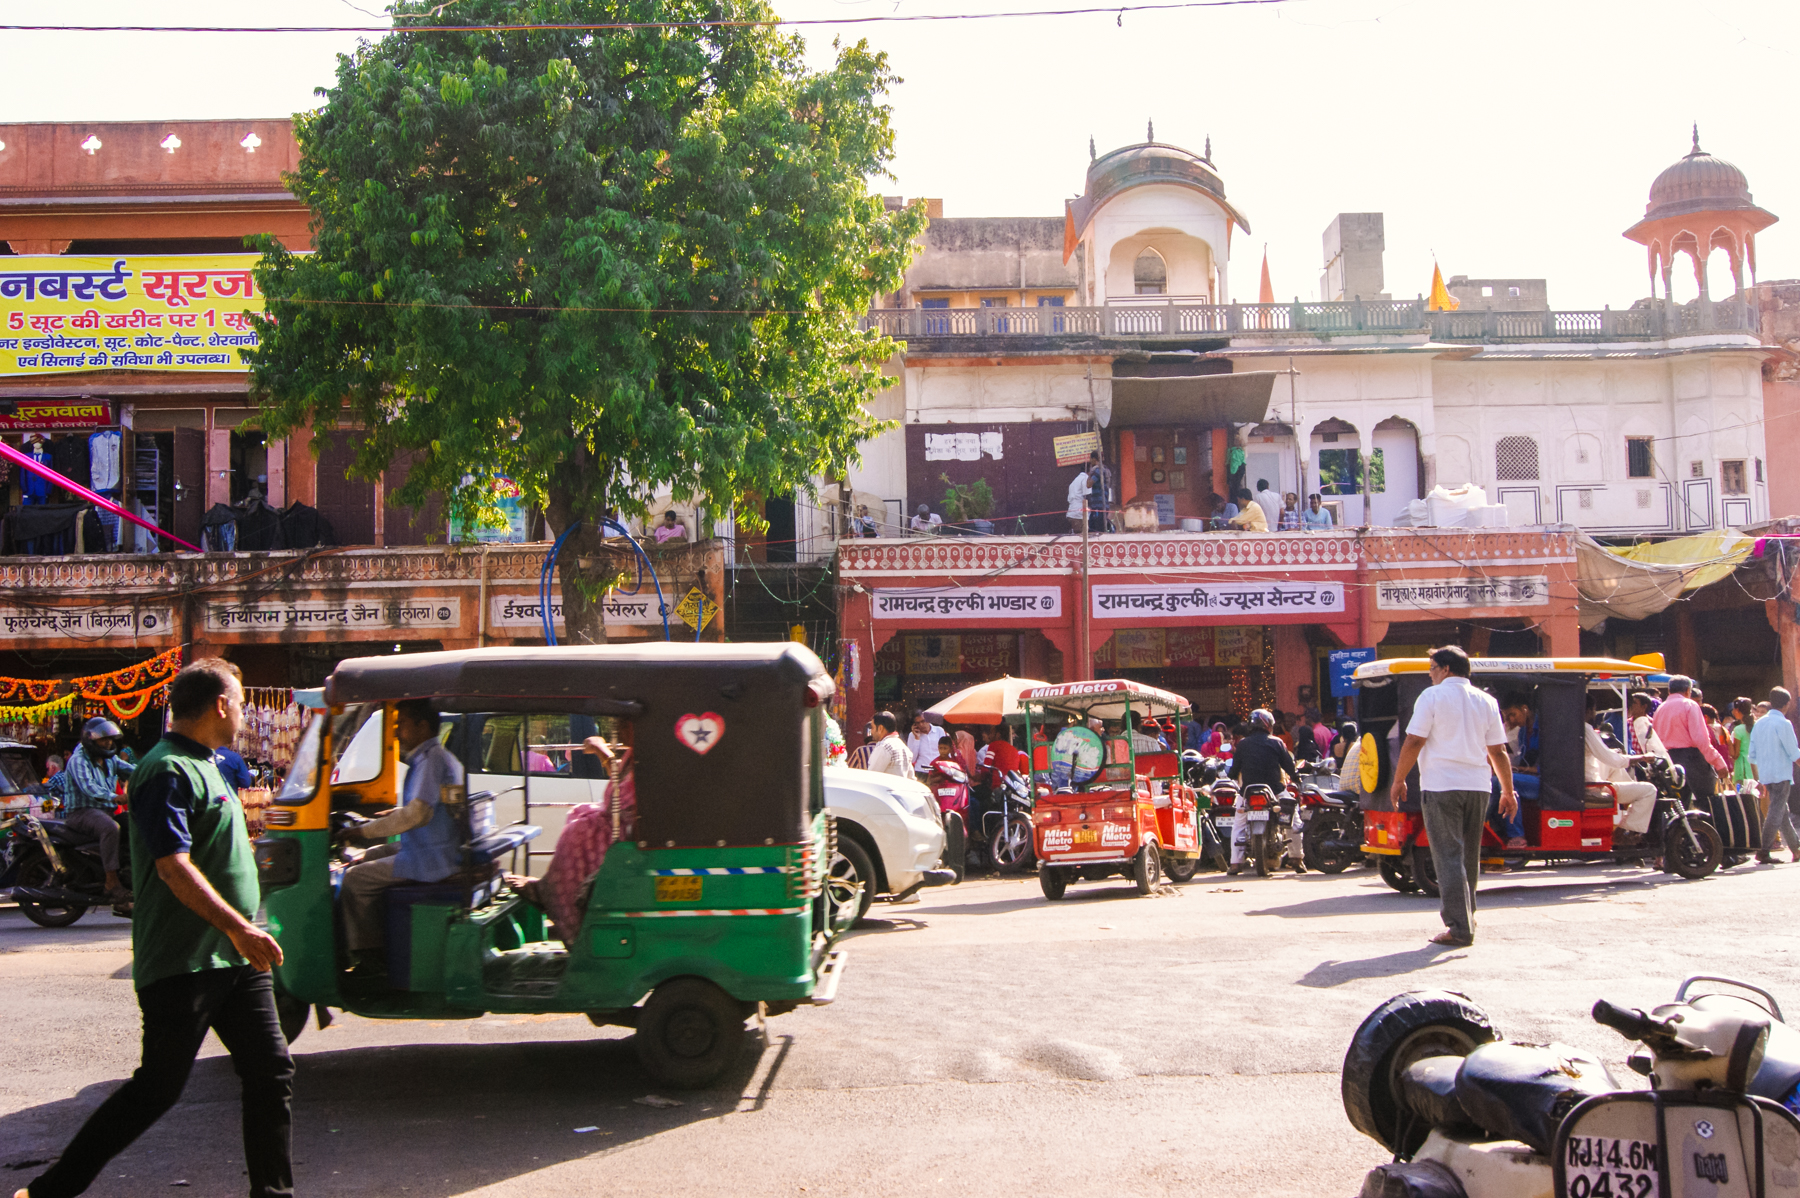 The chaotic streets of Jaipur and its markets